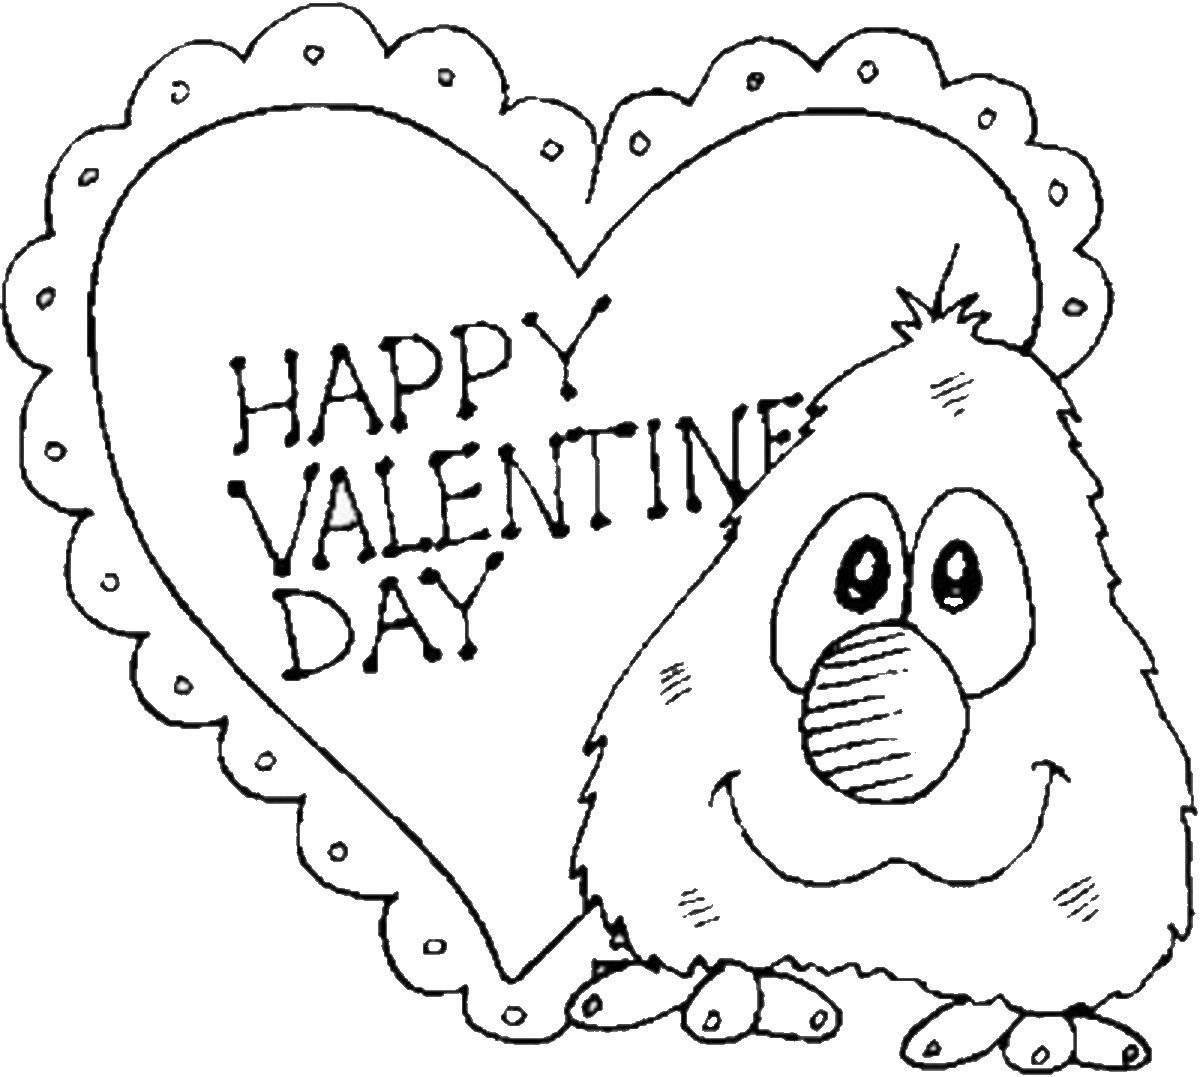 Coloring page glorious February 14th